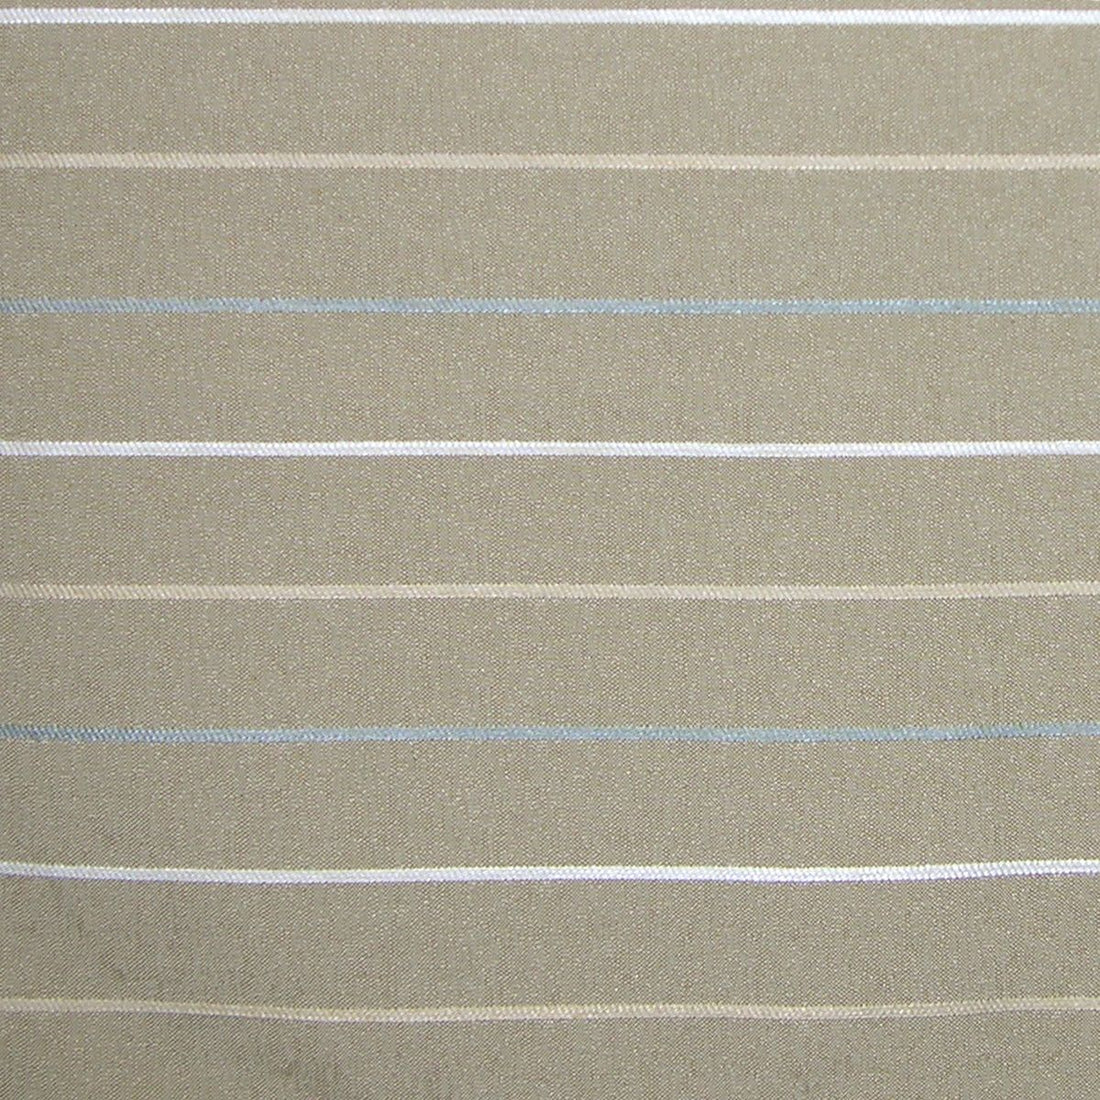 Calabria Stripe fabric in blue/beige color - pattern number VN 06050966 - by Scalamandre in the Old World Weavers collection